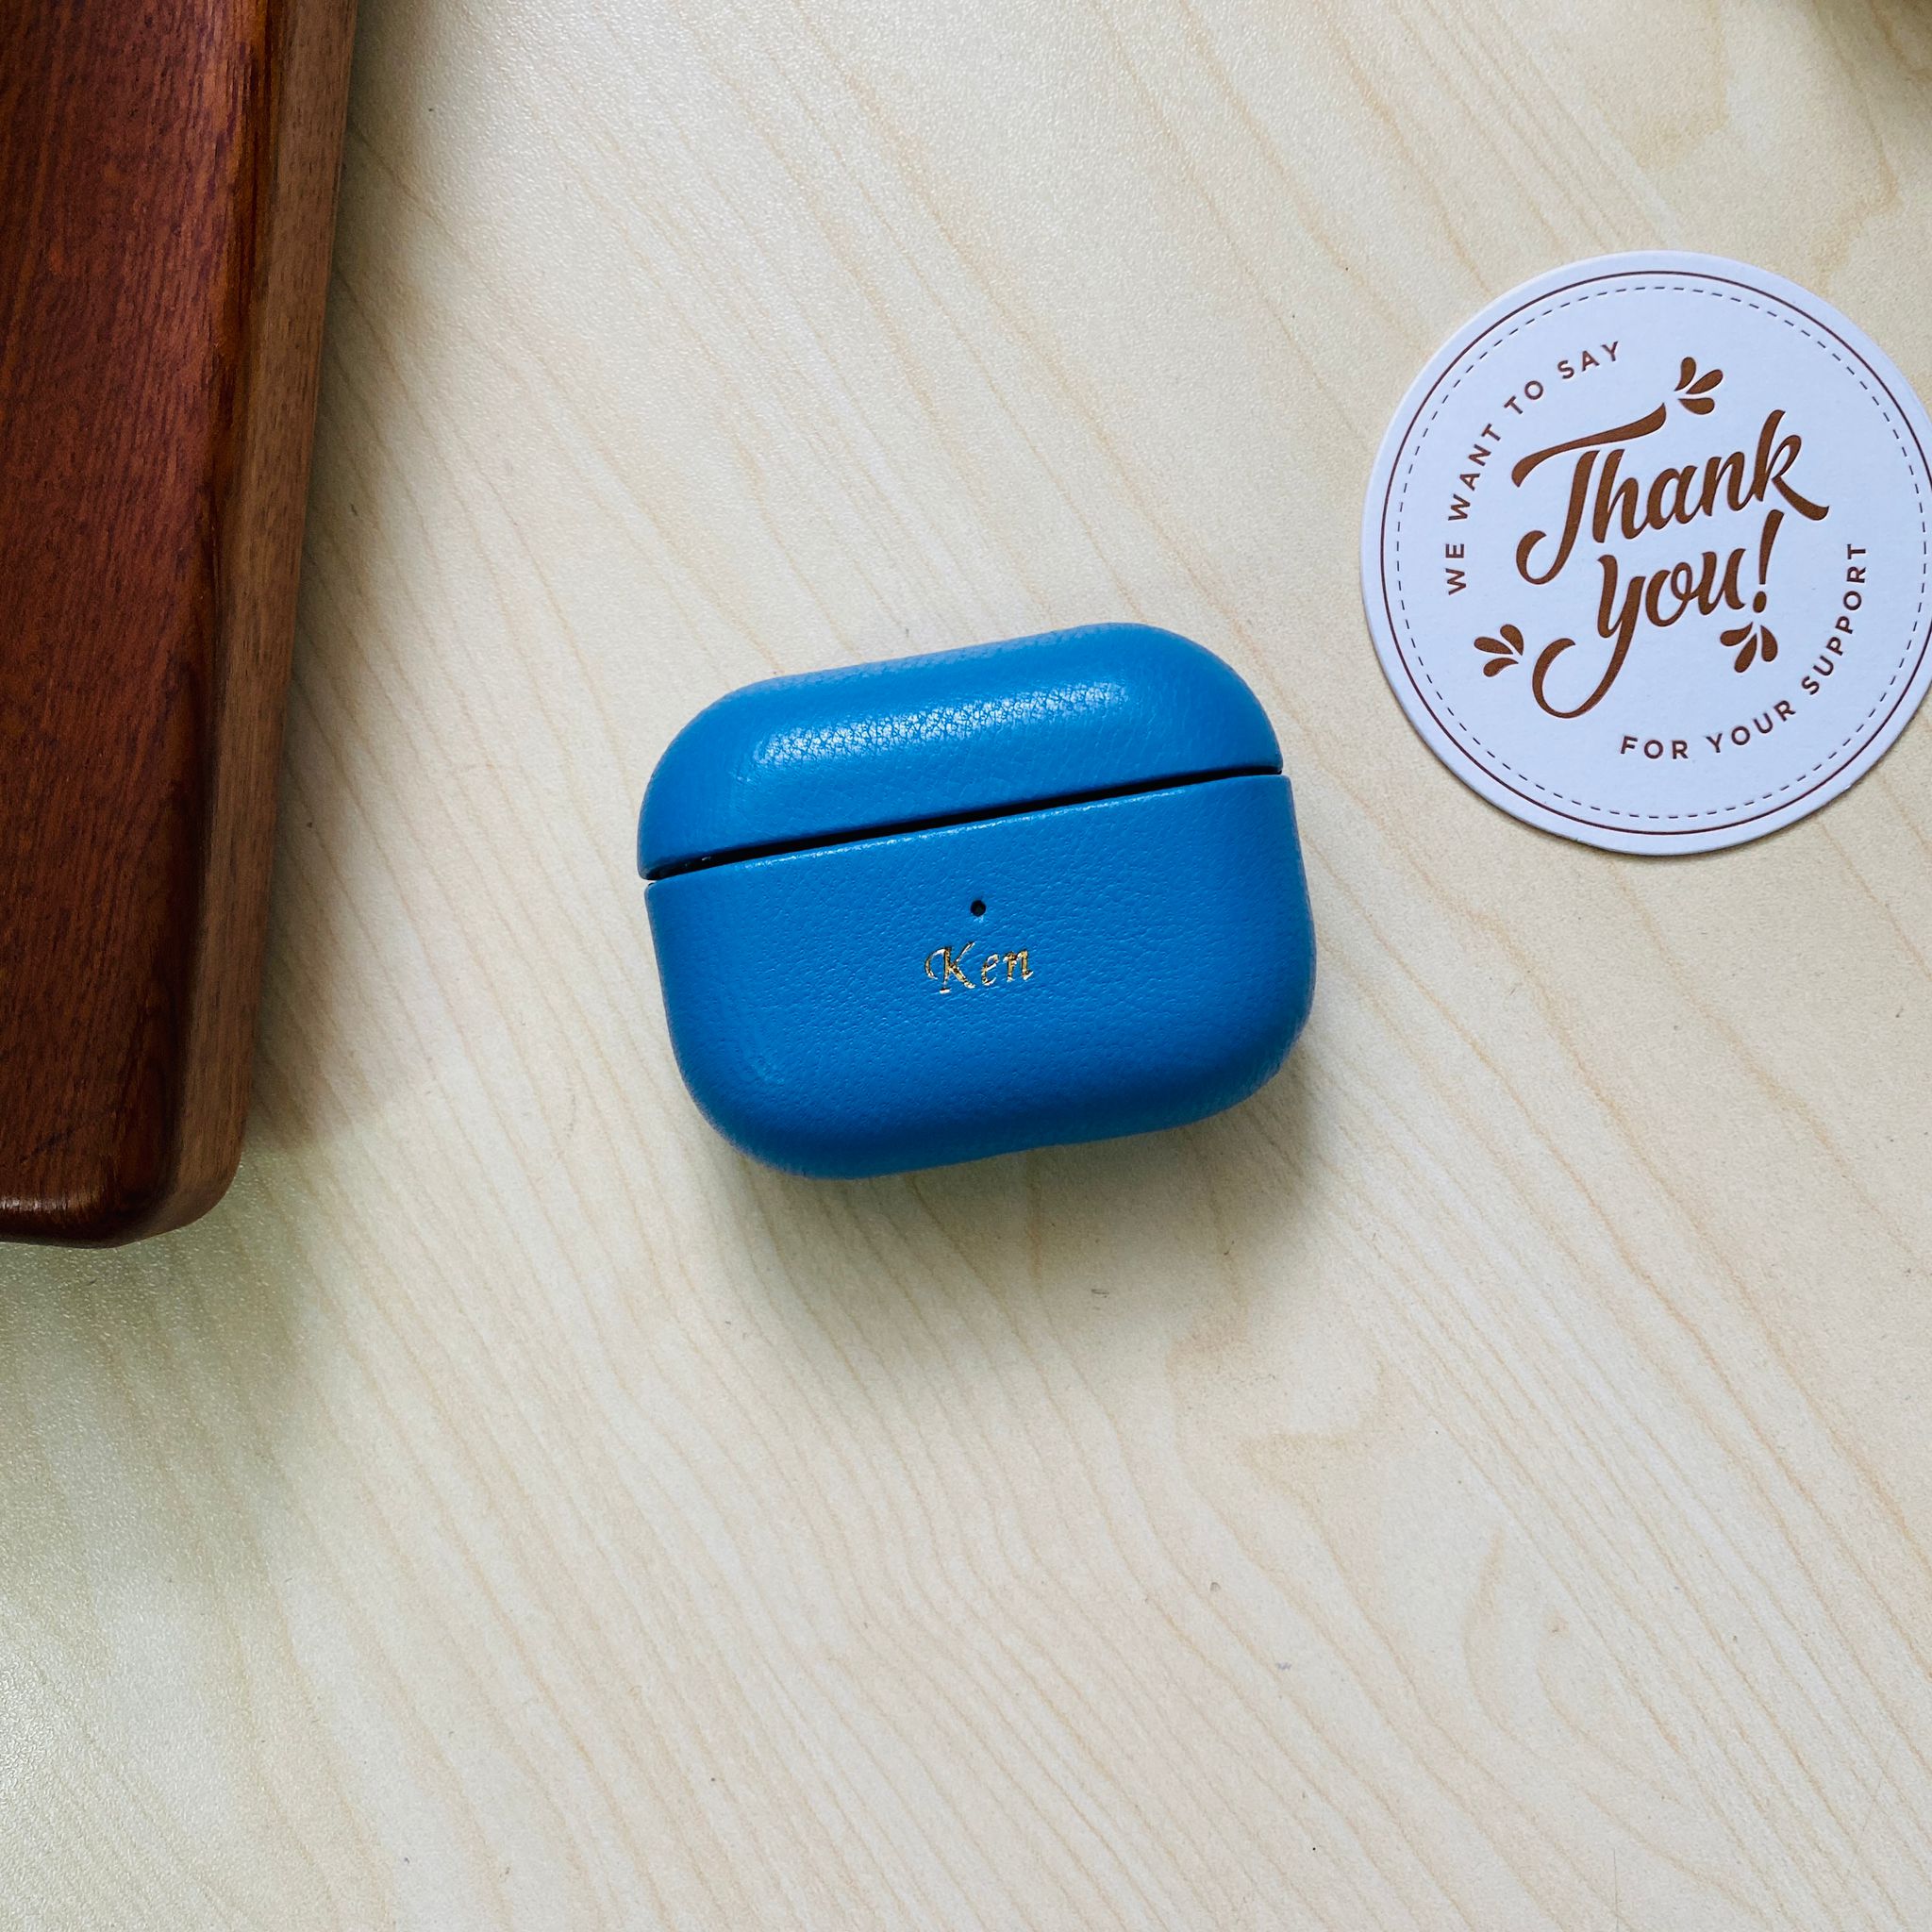 Skyblue Leather AirPod Case with personalized